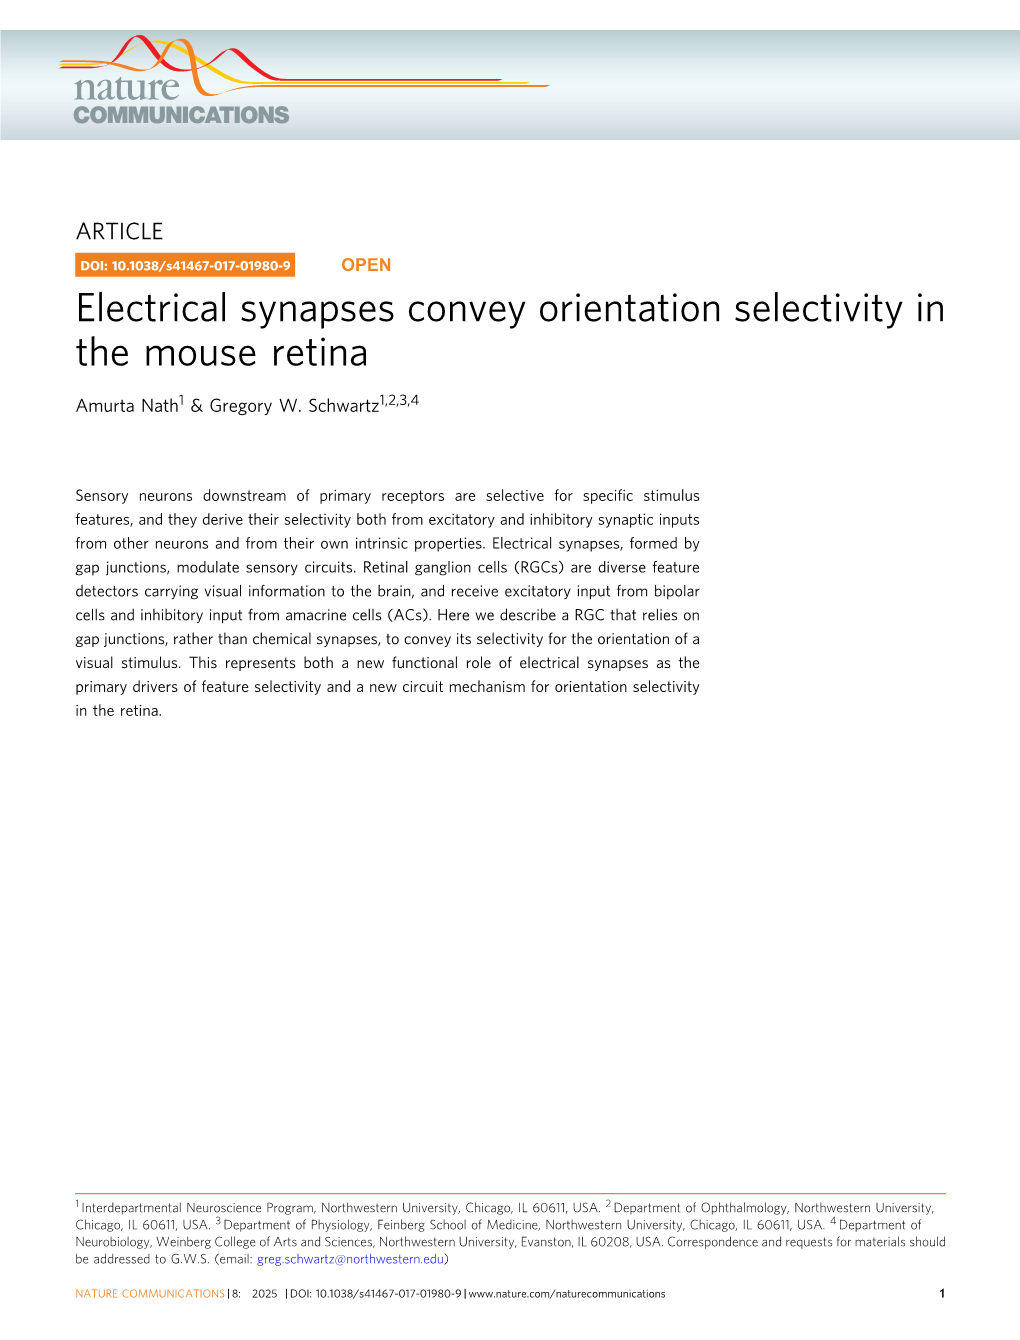 Electrical Synapses Convey Orientation Selectivity in the Mouse Retina